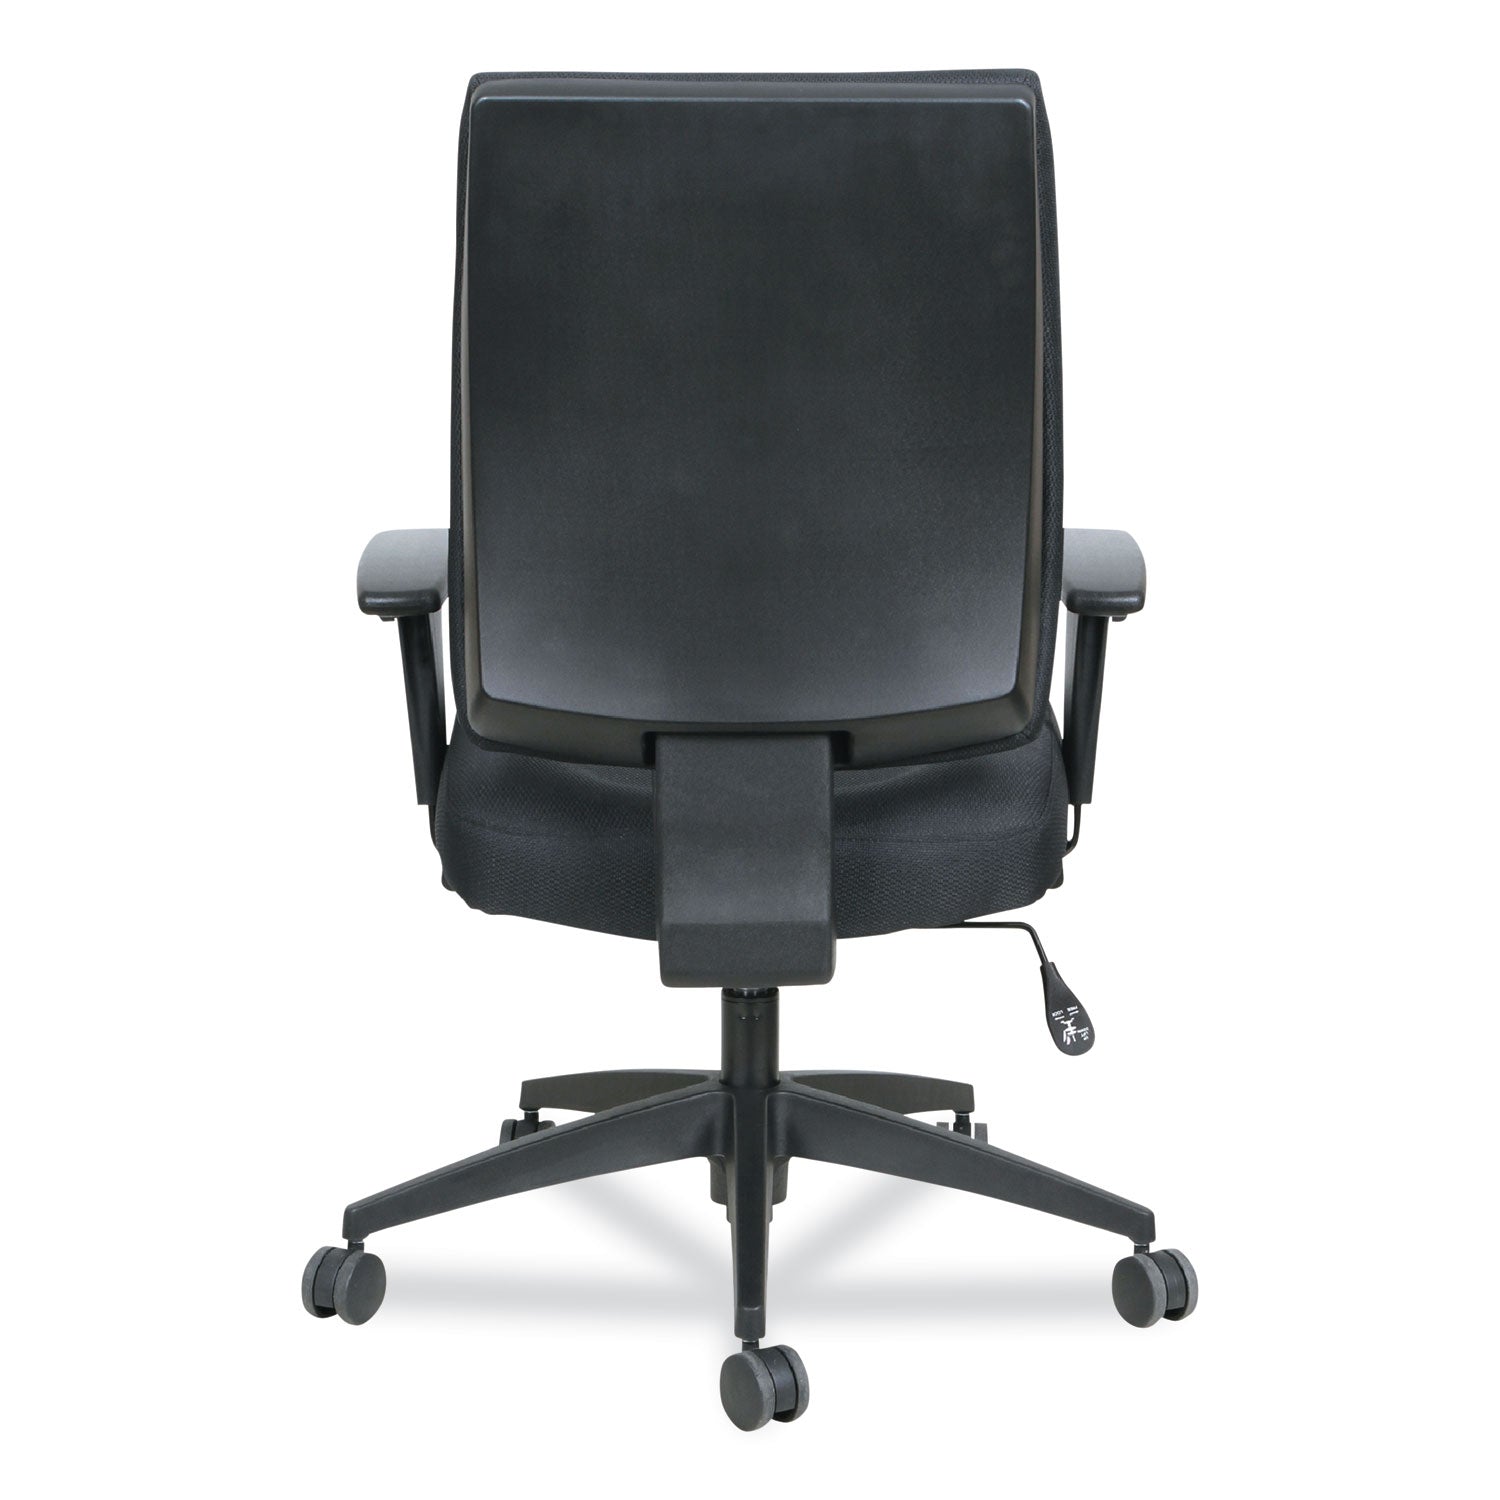 alera-wrigley-series-high-performance-mid-back-synchro-tilt-task-chair-supports-275-lb-1791-to-2188-seat-height-black_alehps4201 - 6